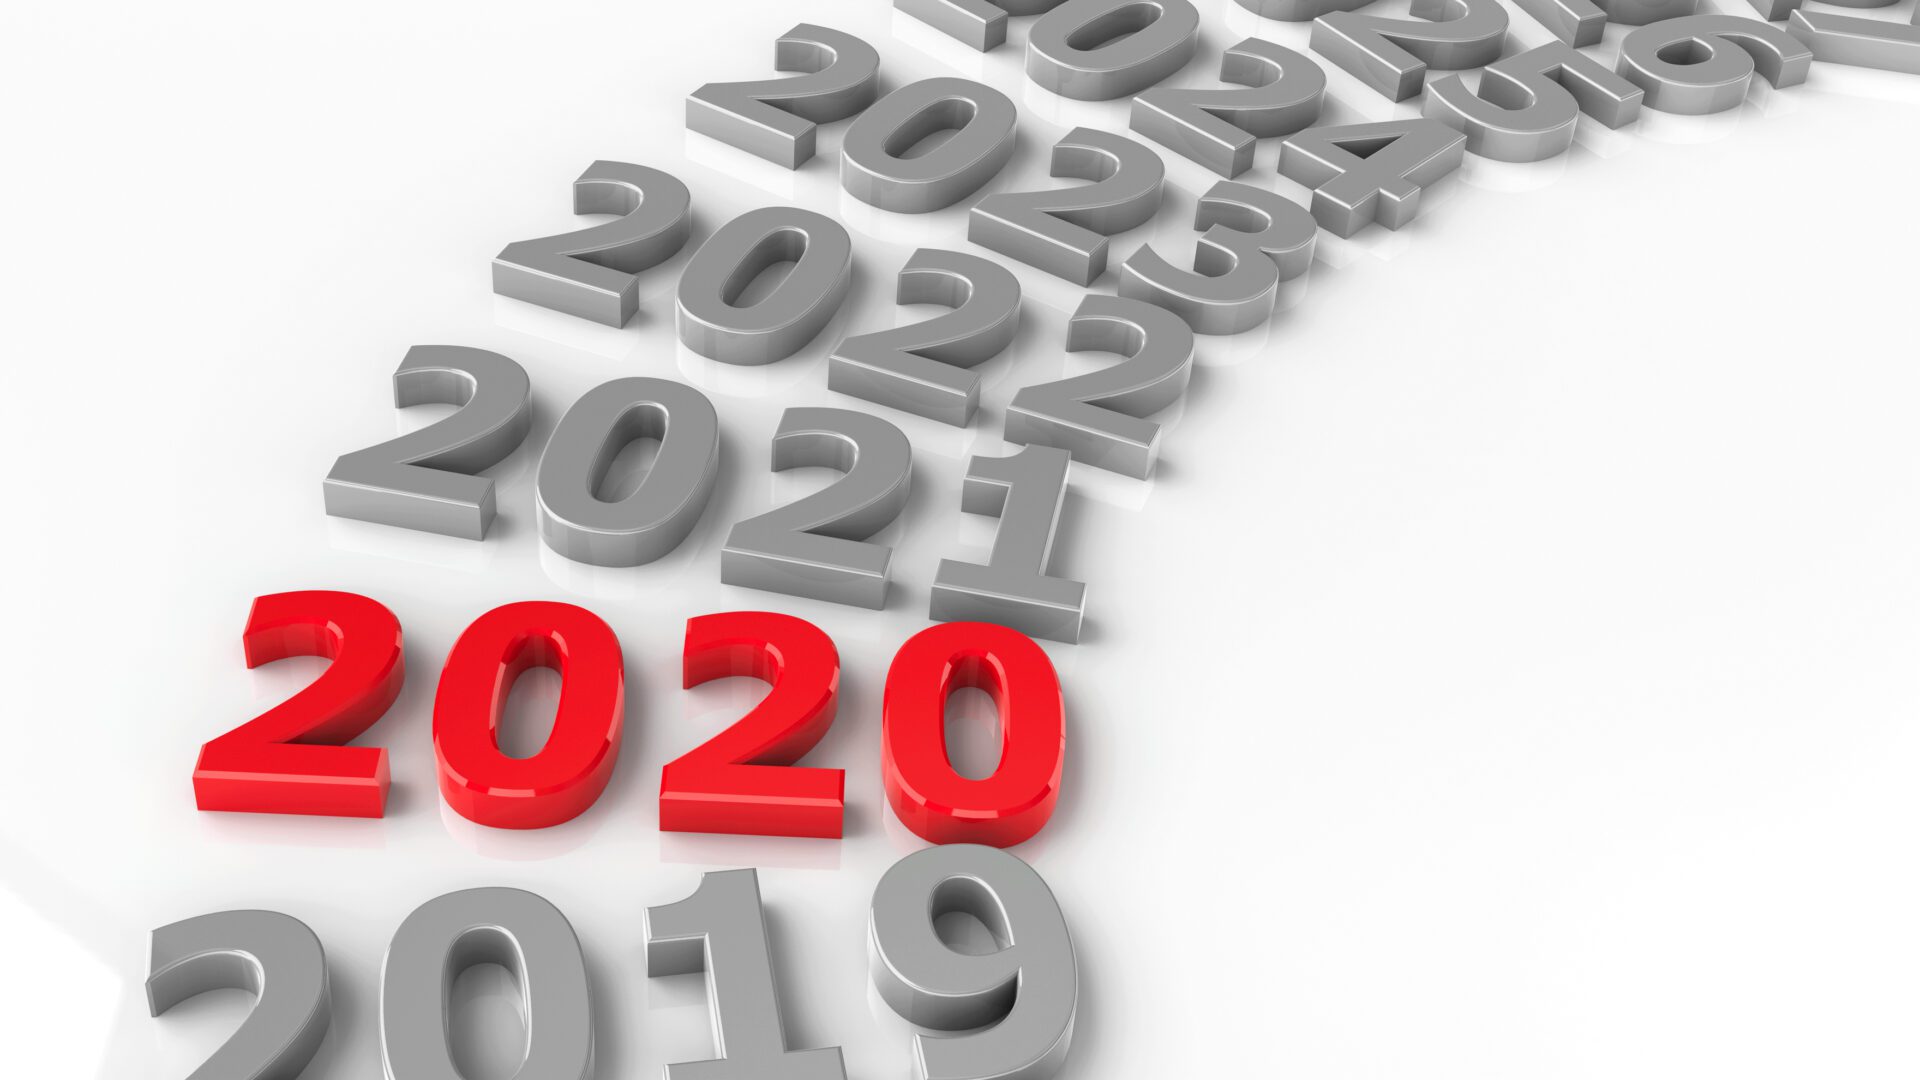 Graphic illustrating years with 2020 highlighted